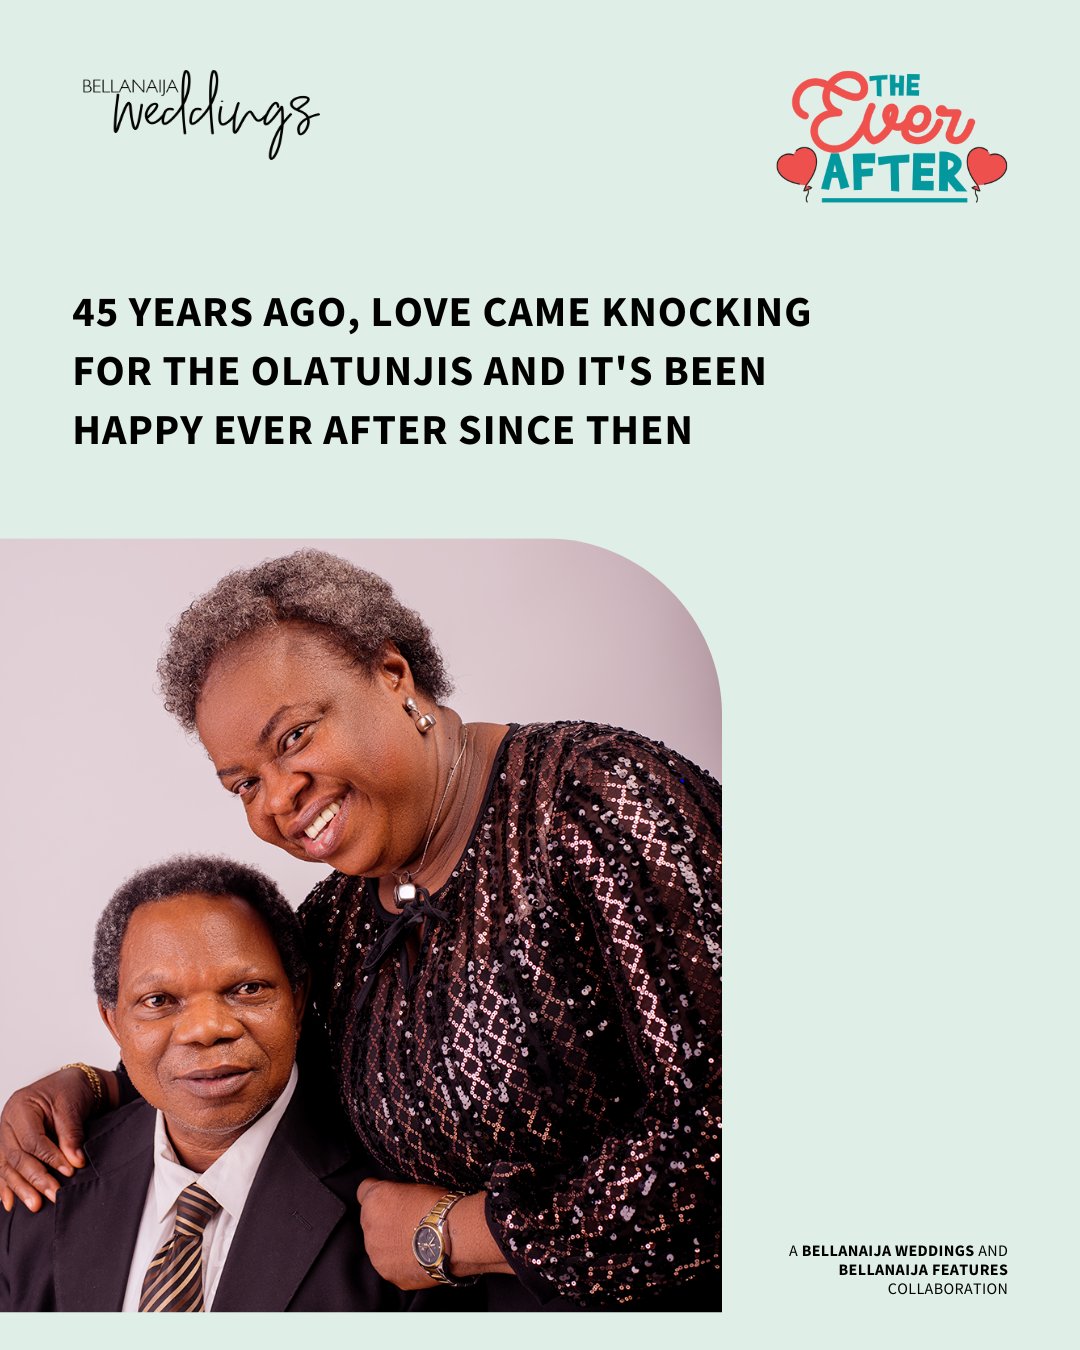 45 Years In the past, Love Got here Knocking for The Olatunjis and it’s Been Joyful Ever After Since Then